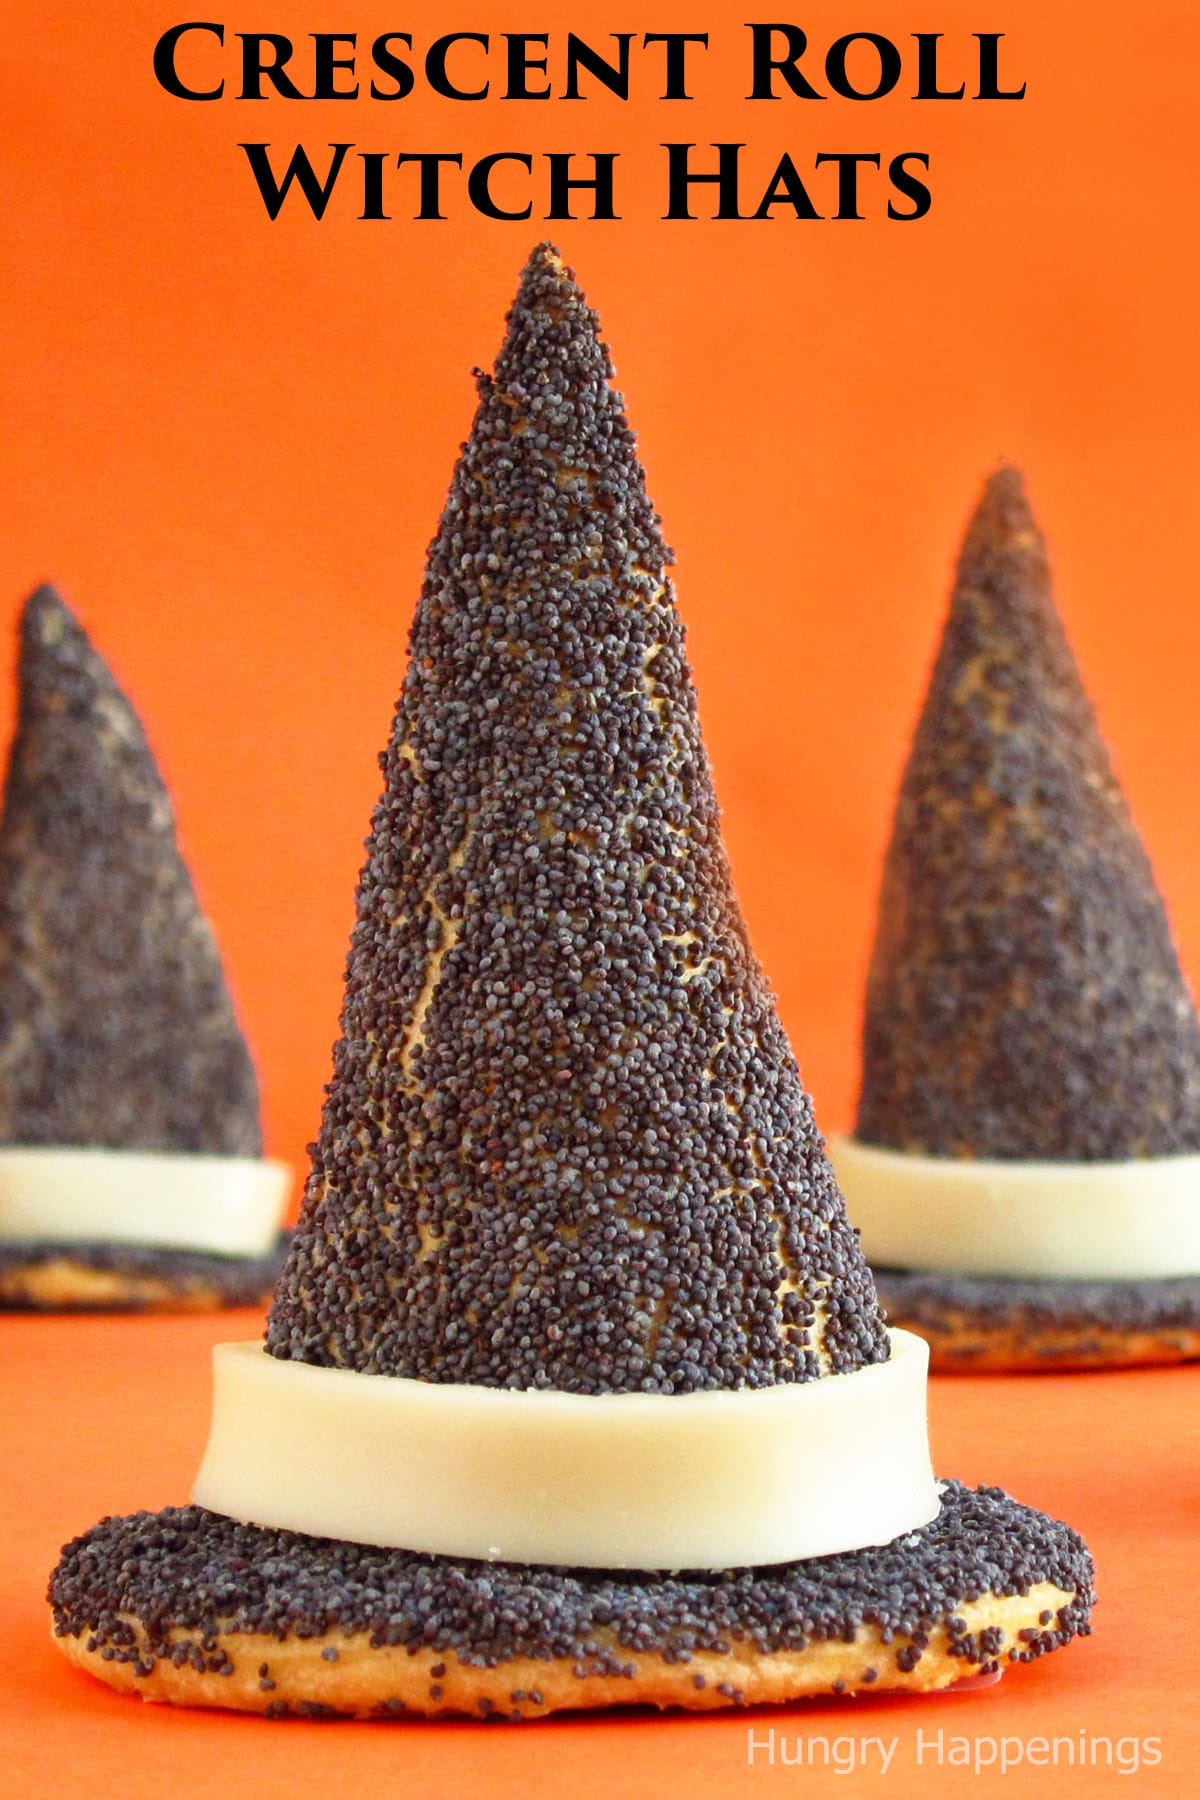 poppy seed-covered crescent rolls shaped like witch hats. 